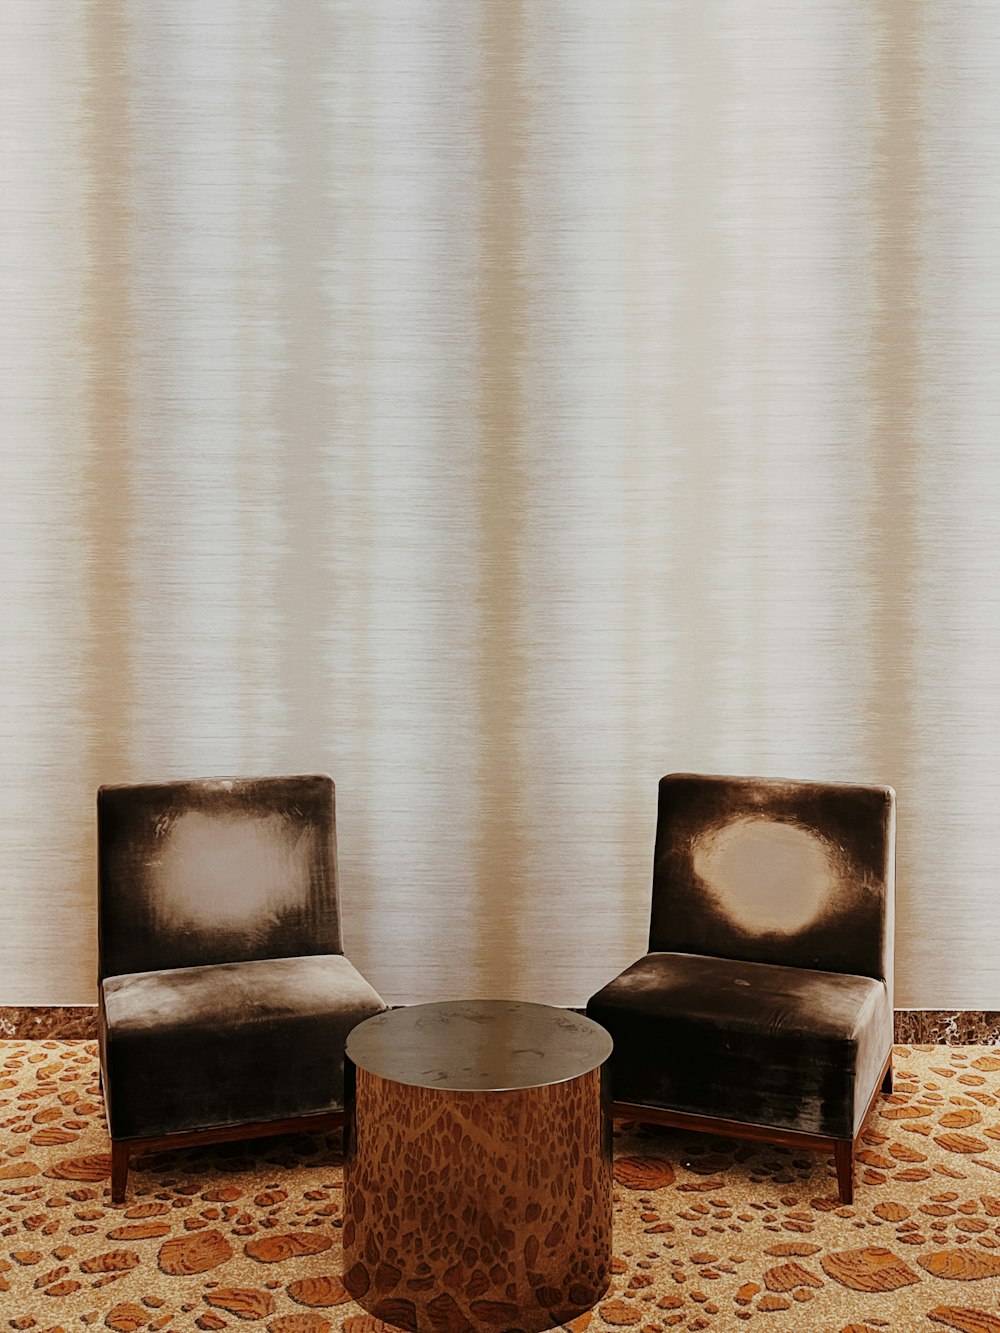 brown wooden round table beside brown and black armchair